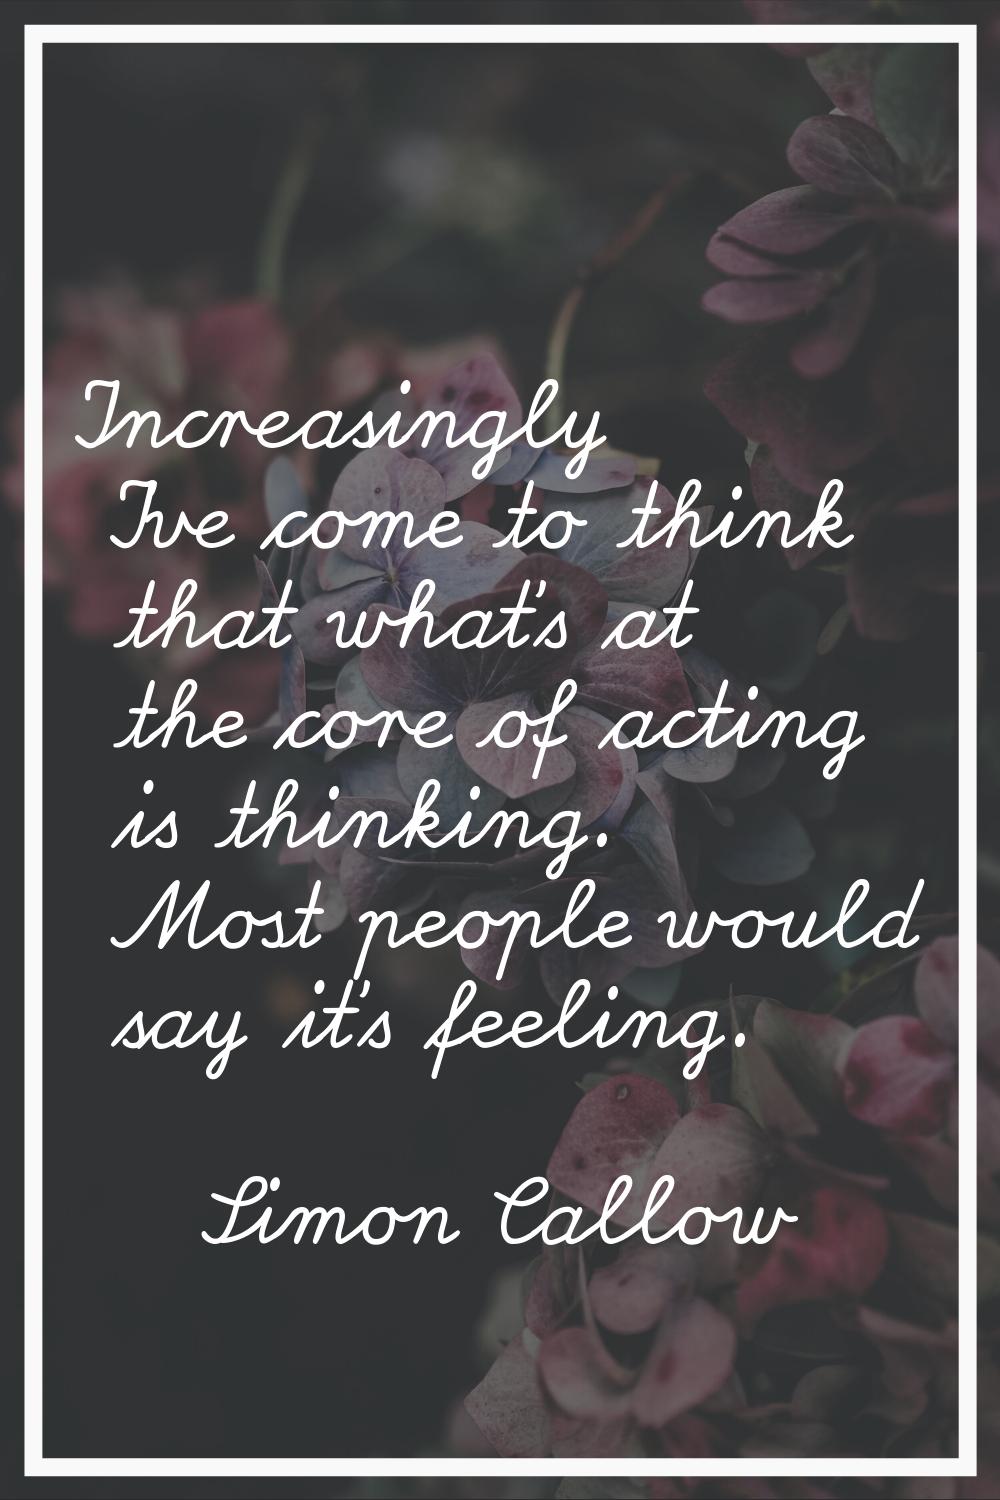 Increasingly I've come to think that what's at the core of acting is thinking. Most people would sa